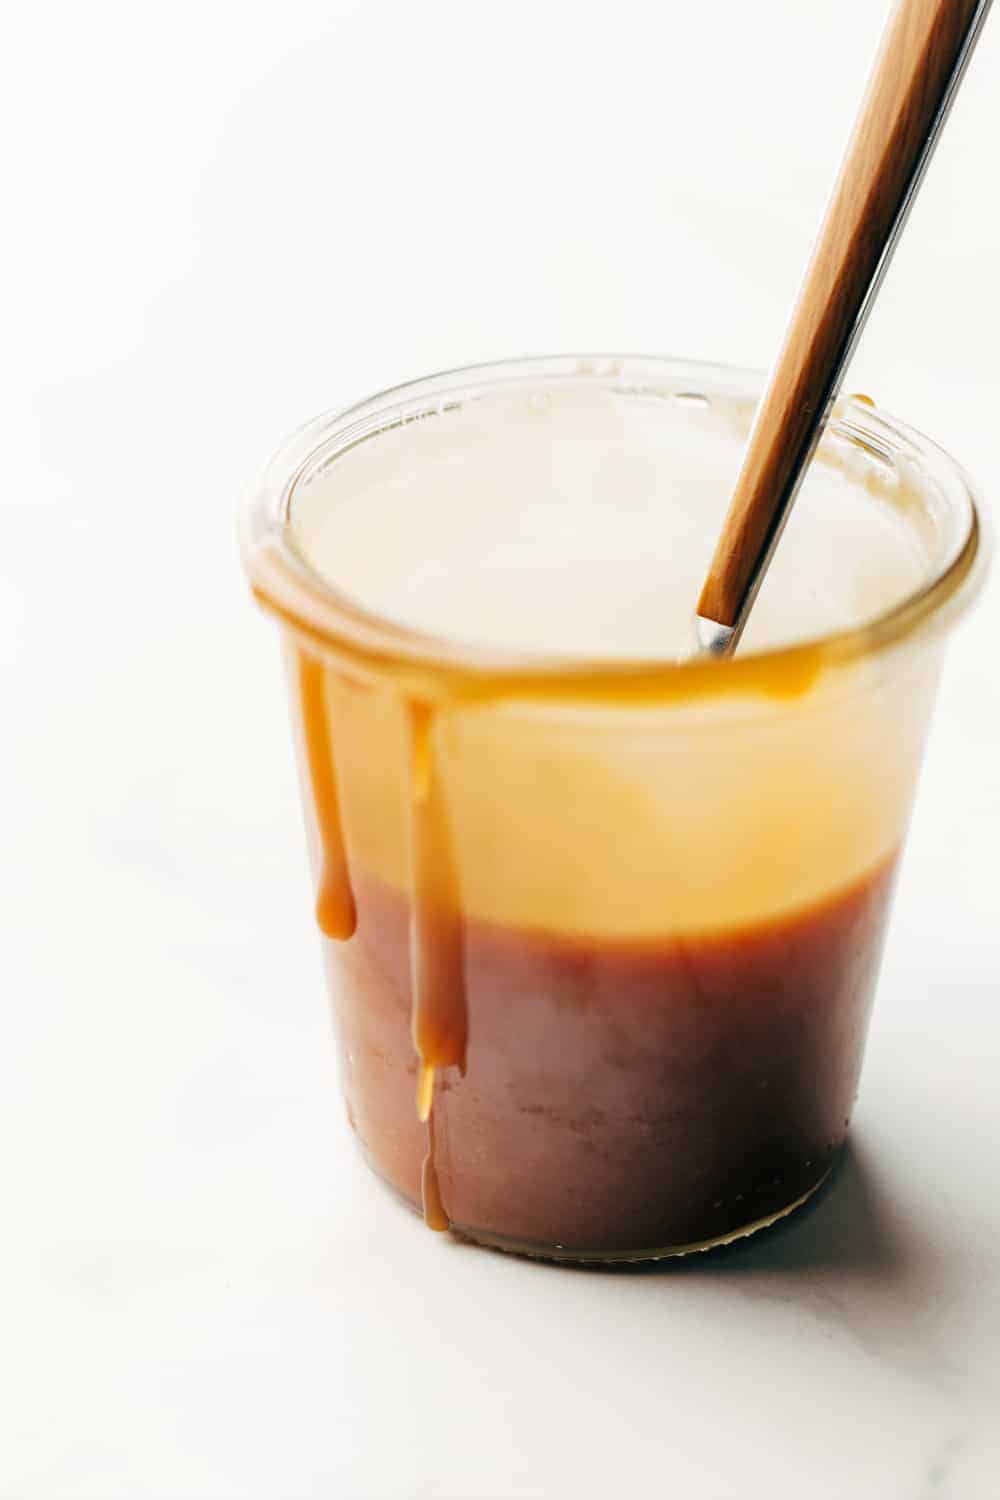 Homemade salted caramel sauce is so good, you may just want to eat it from a spoon!